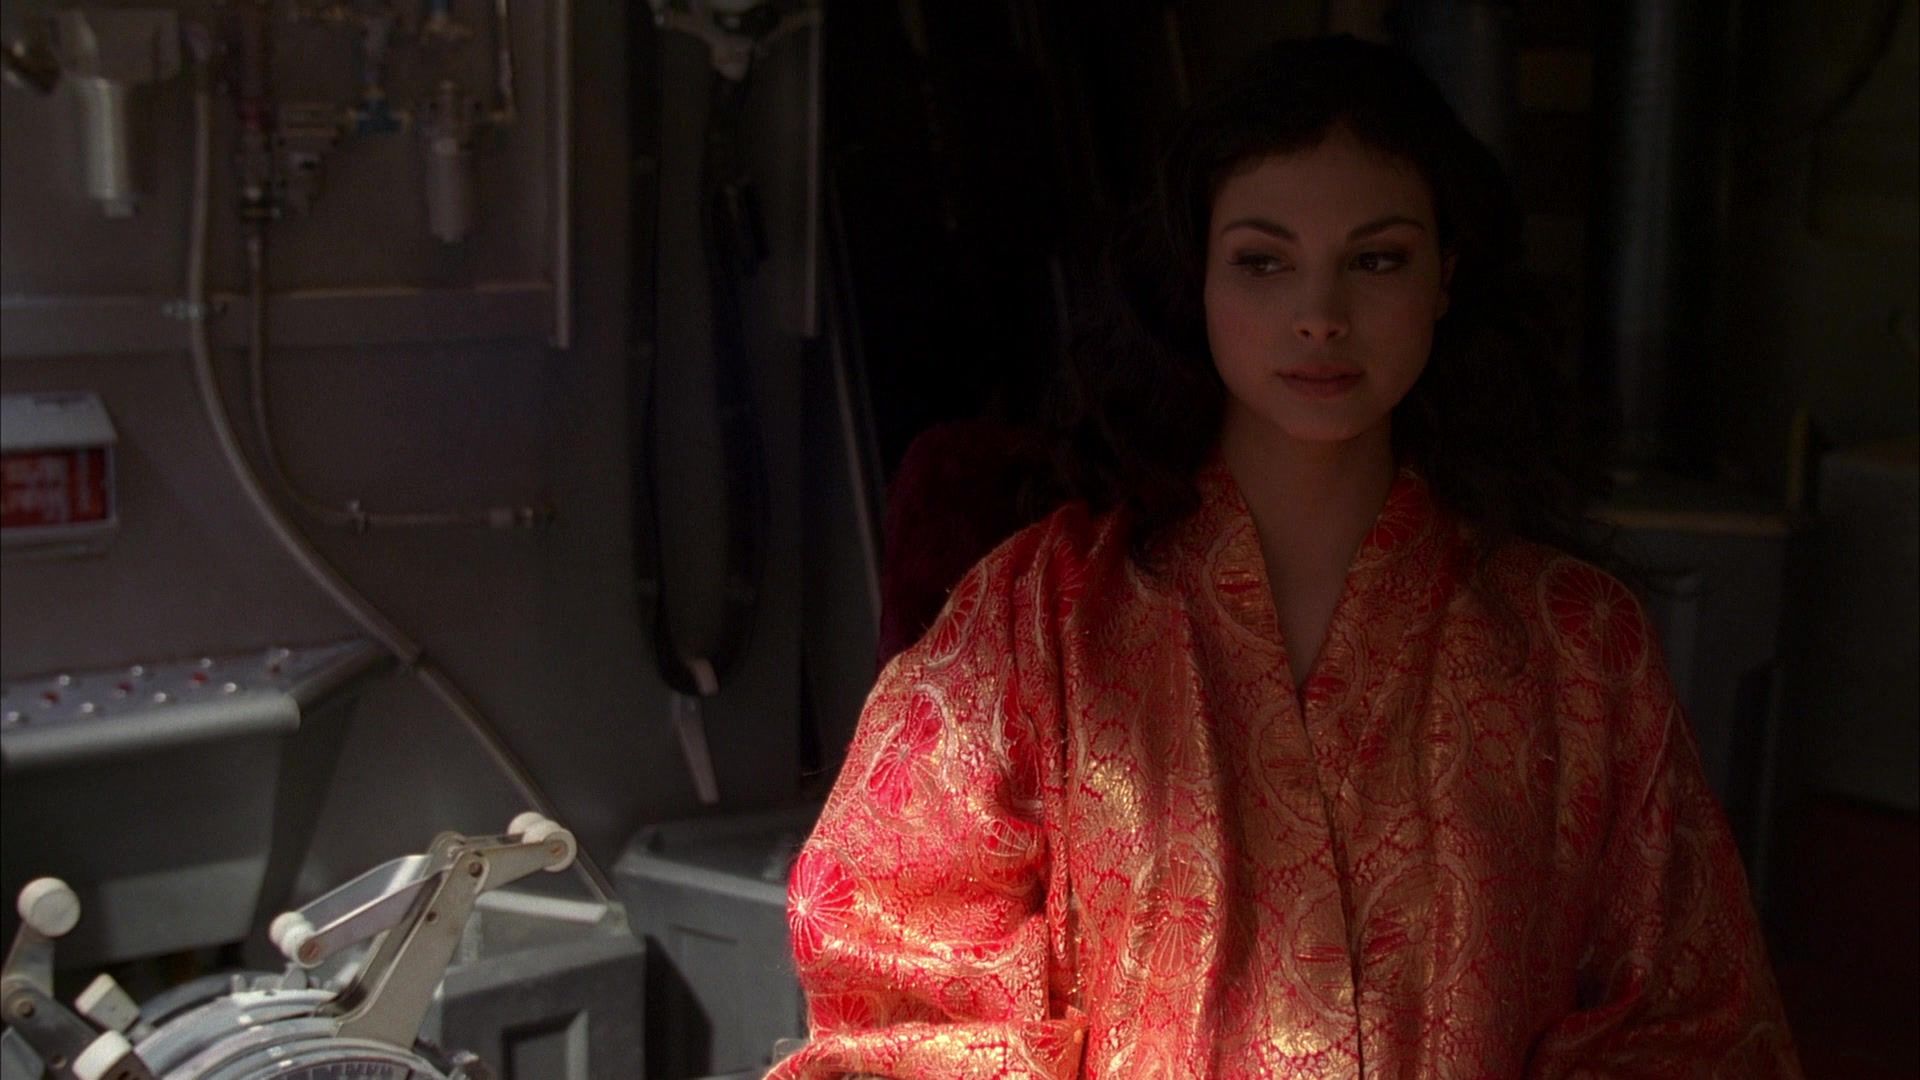 Inara Serra (Morena Baccarin) in the Firefly episode ‘Serenity’. She is standing in her decadently decorated chamber aboard Serenity.